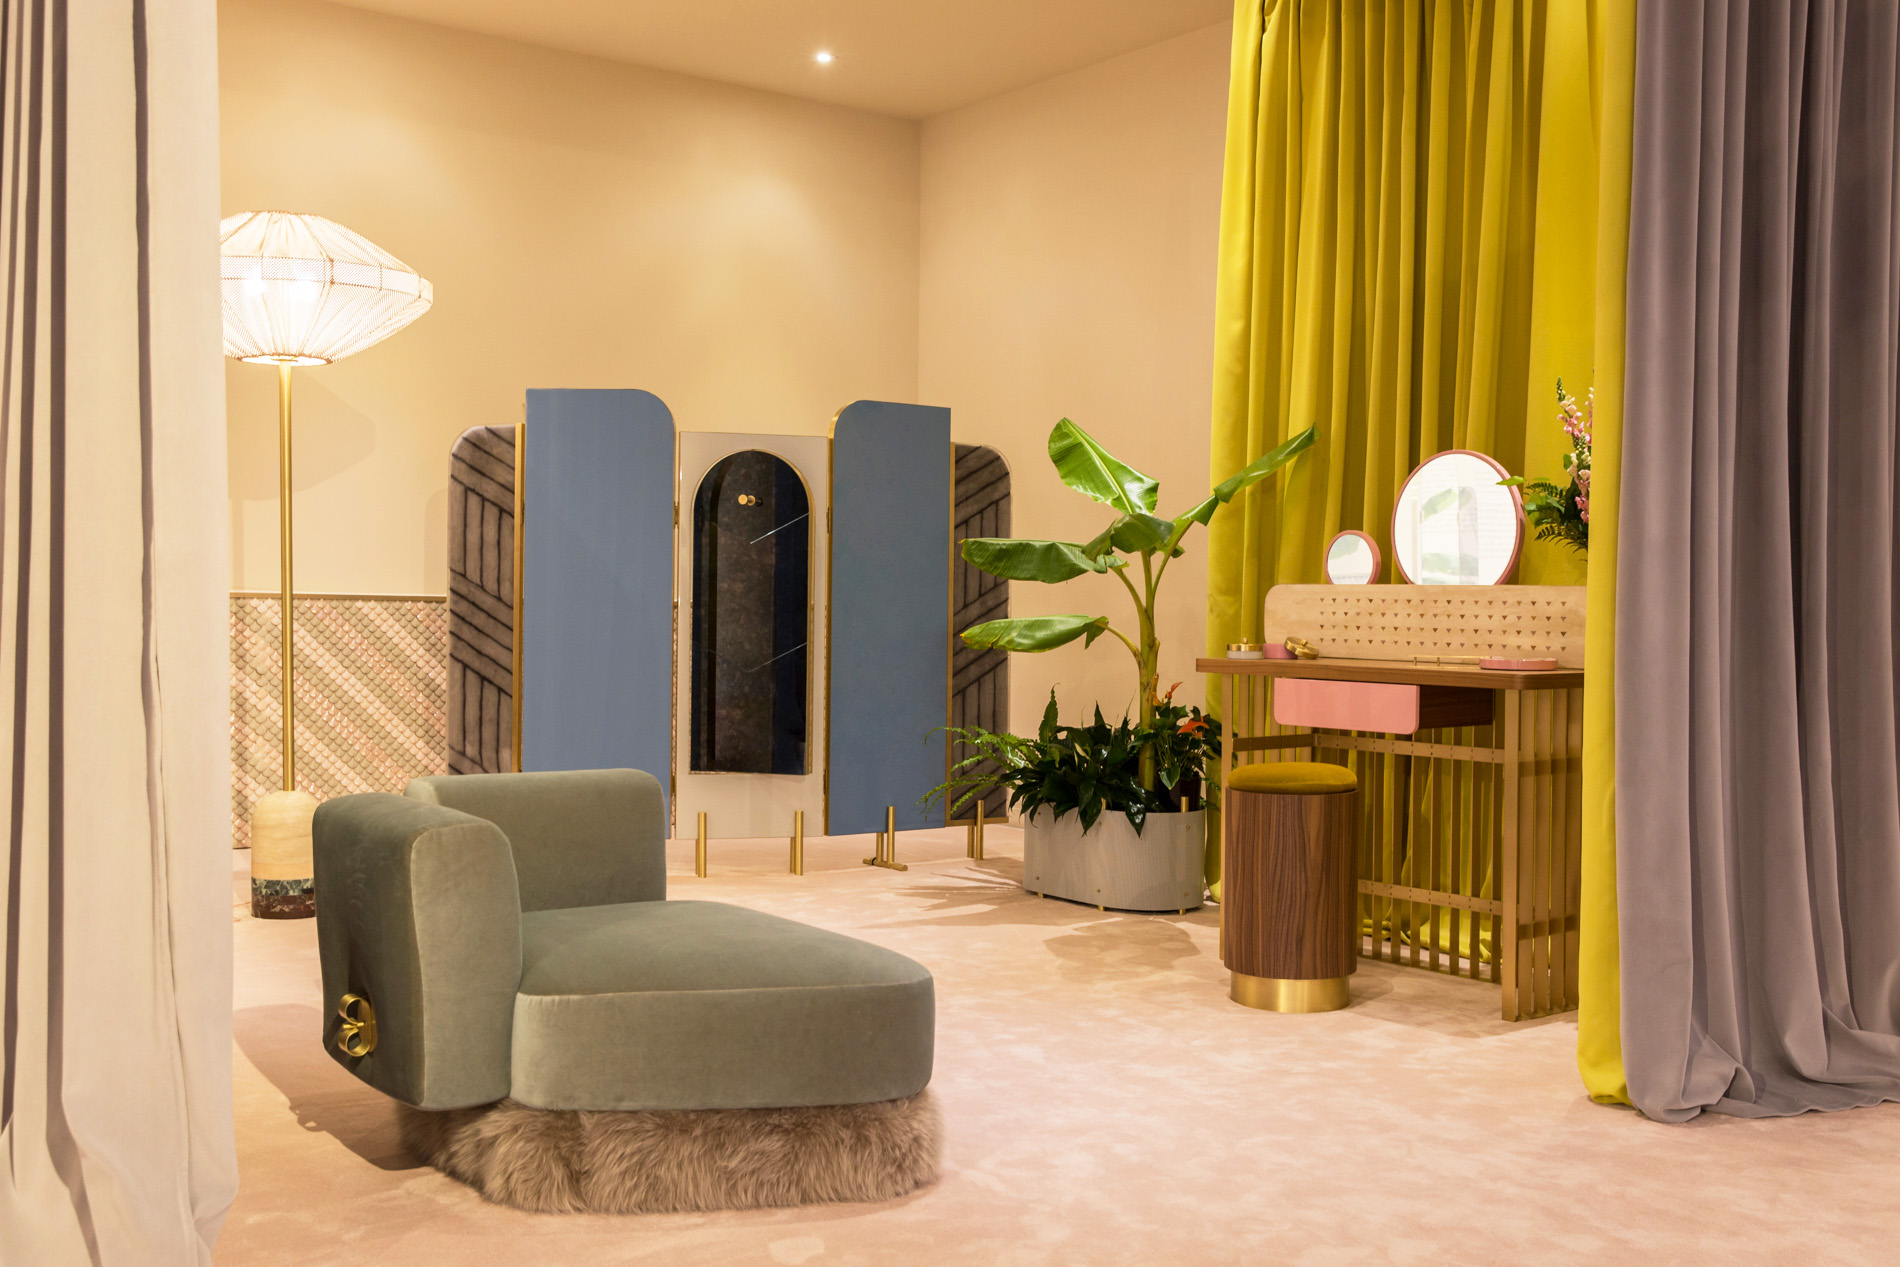 The Happy Room furniture collection and Booth Set-Up at DesignMiami/ 2016 for FENDI